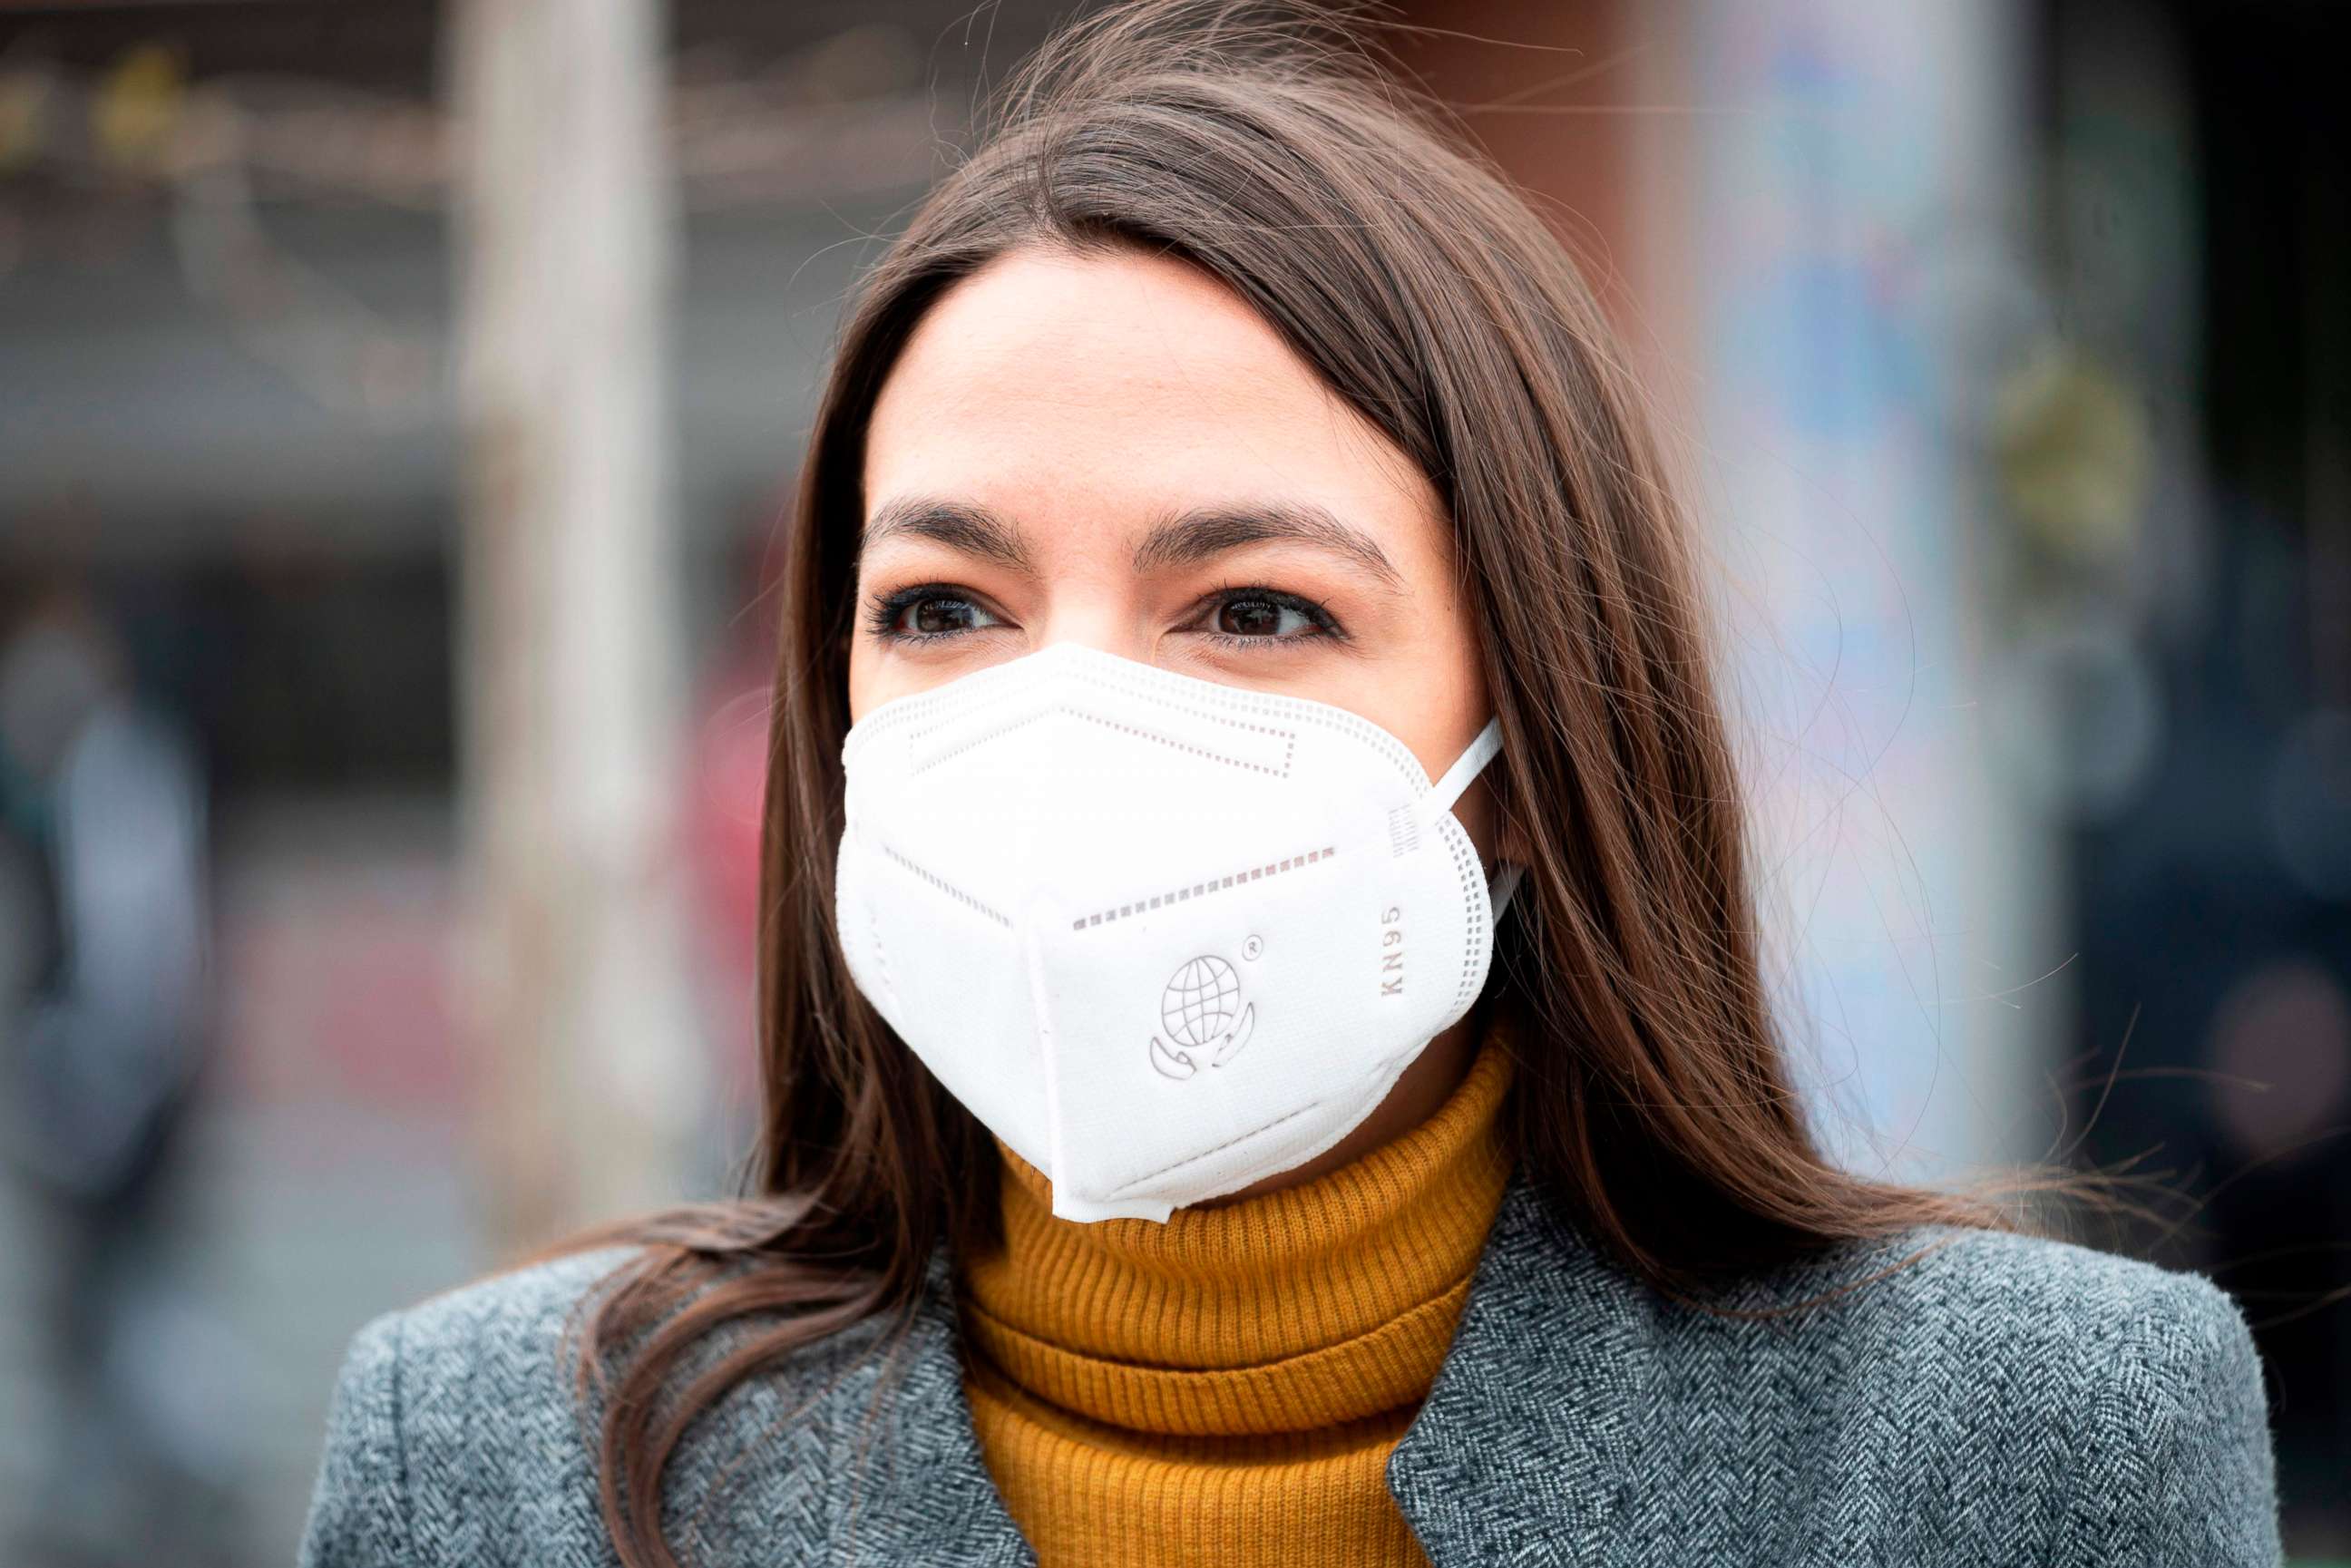 PHOTO: Rep. Alexandria Ocasio-Cortez wears a face mask for protection against the coronavirus, during a press conference on April 14, 2020 in New York.